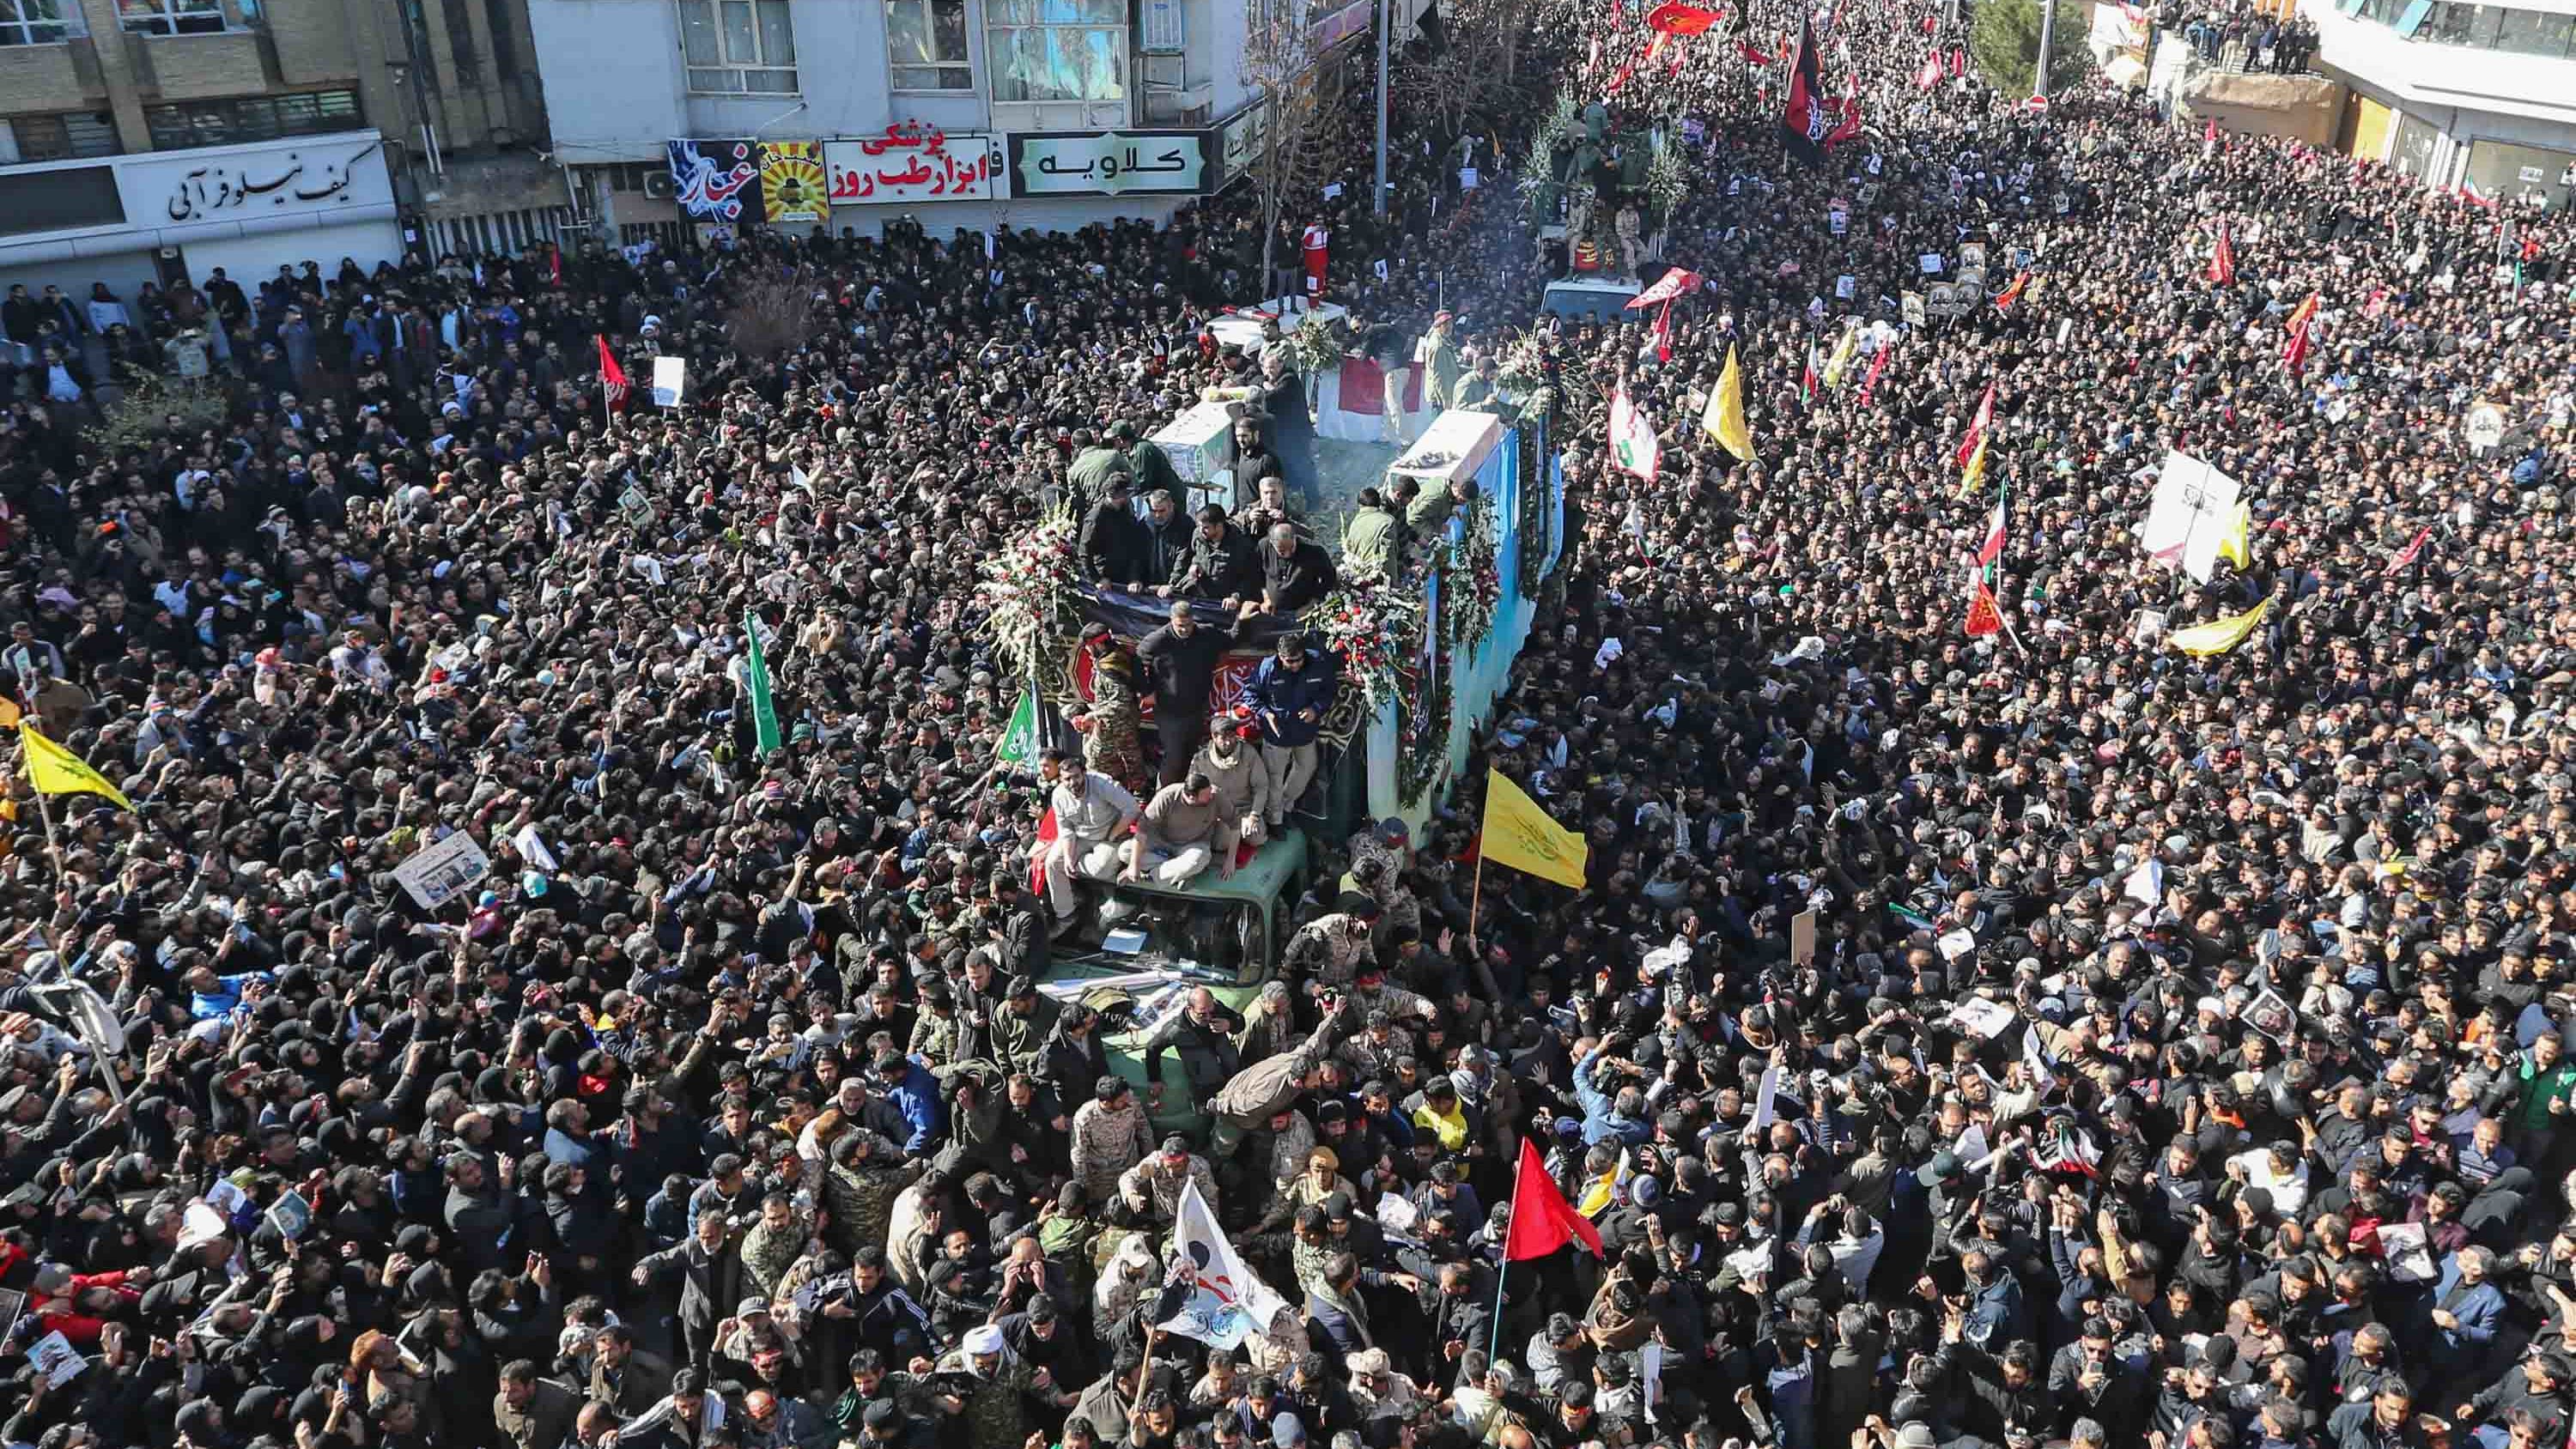 Iranian mourners gather around a vehicle carrying the coffin of slain top general Qasem Soleimani during the final stage of funeral processions, in his hometown Kerman on January 7, 2020.